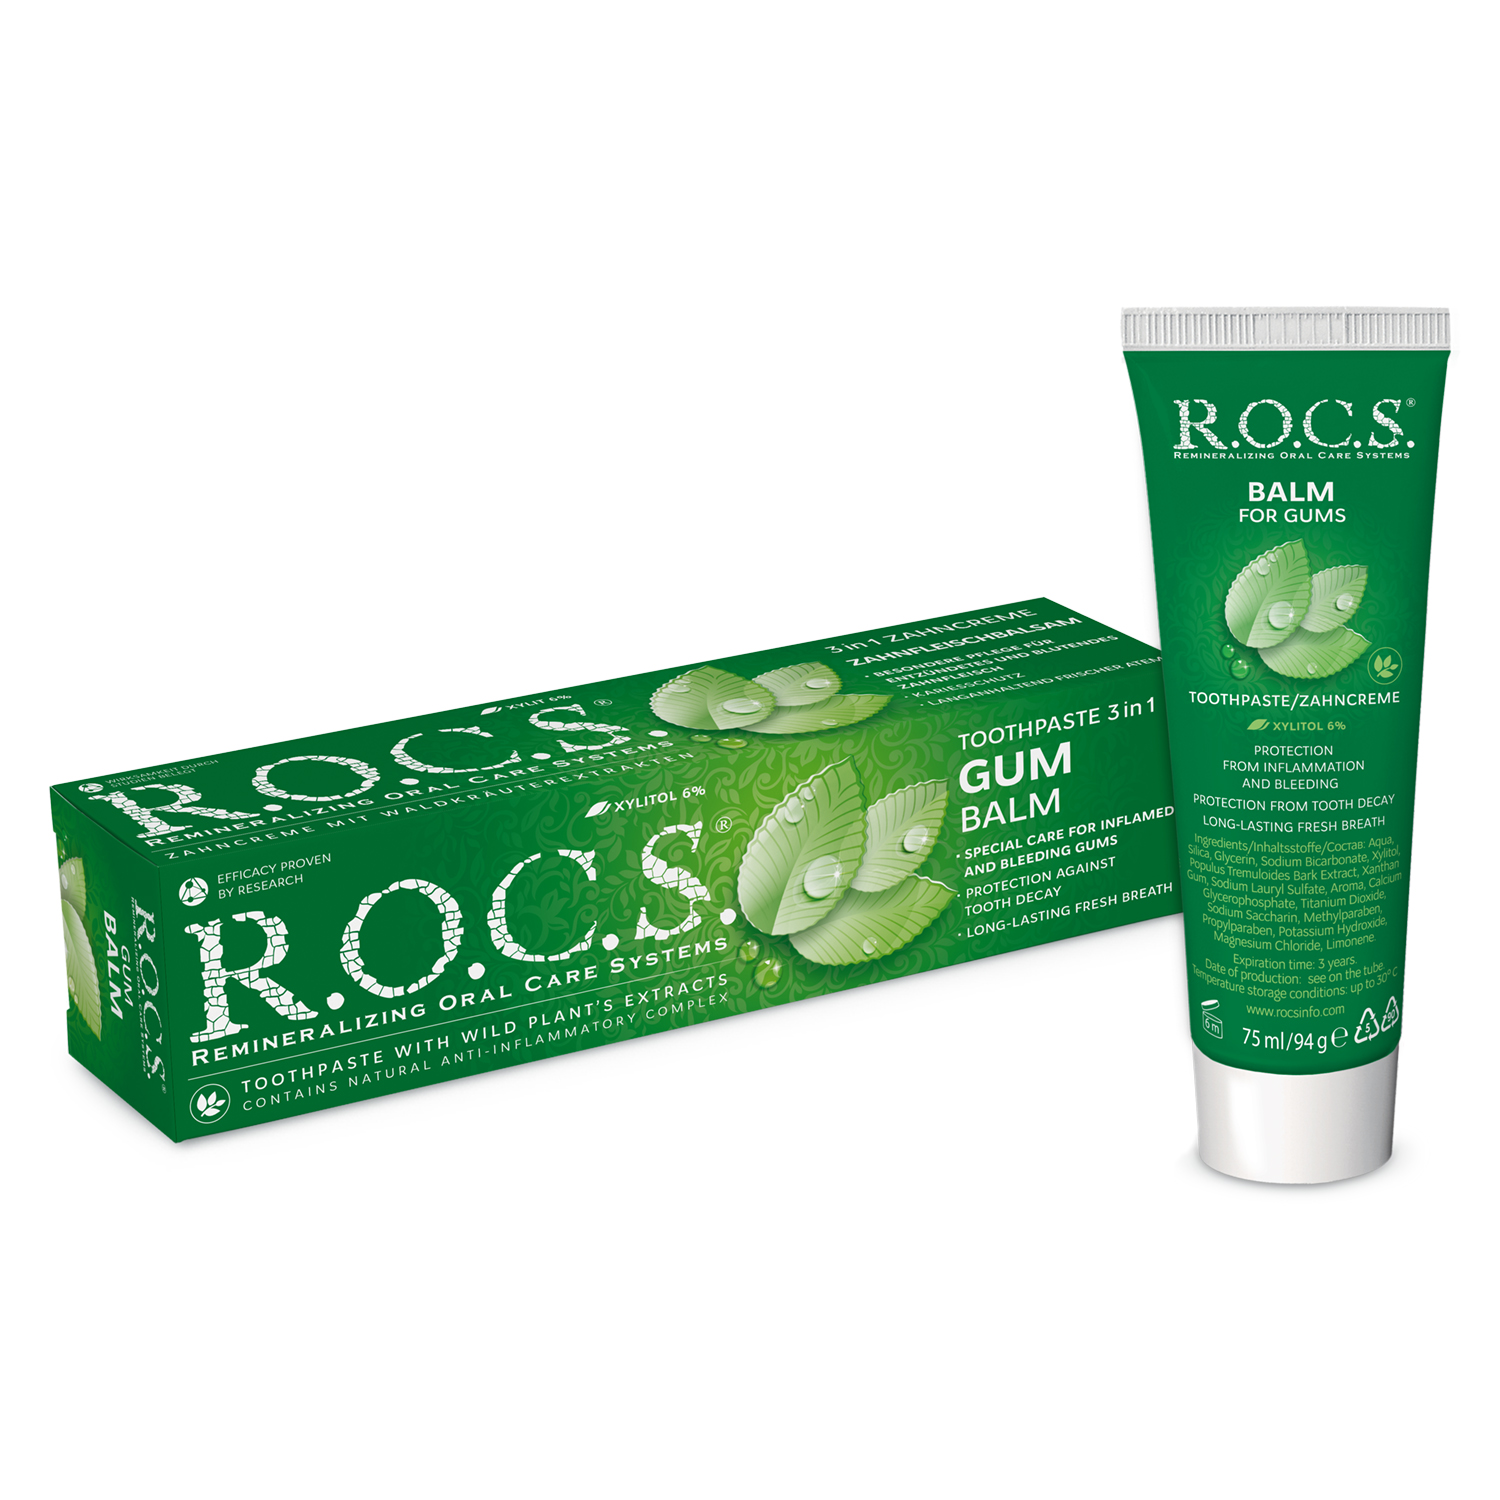 R.O.C.S. Balm For Gums Toothpaste